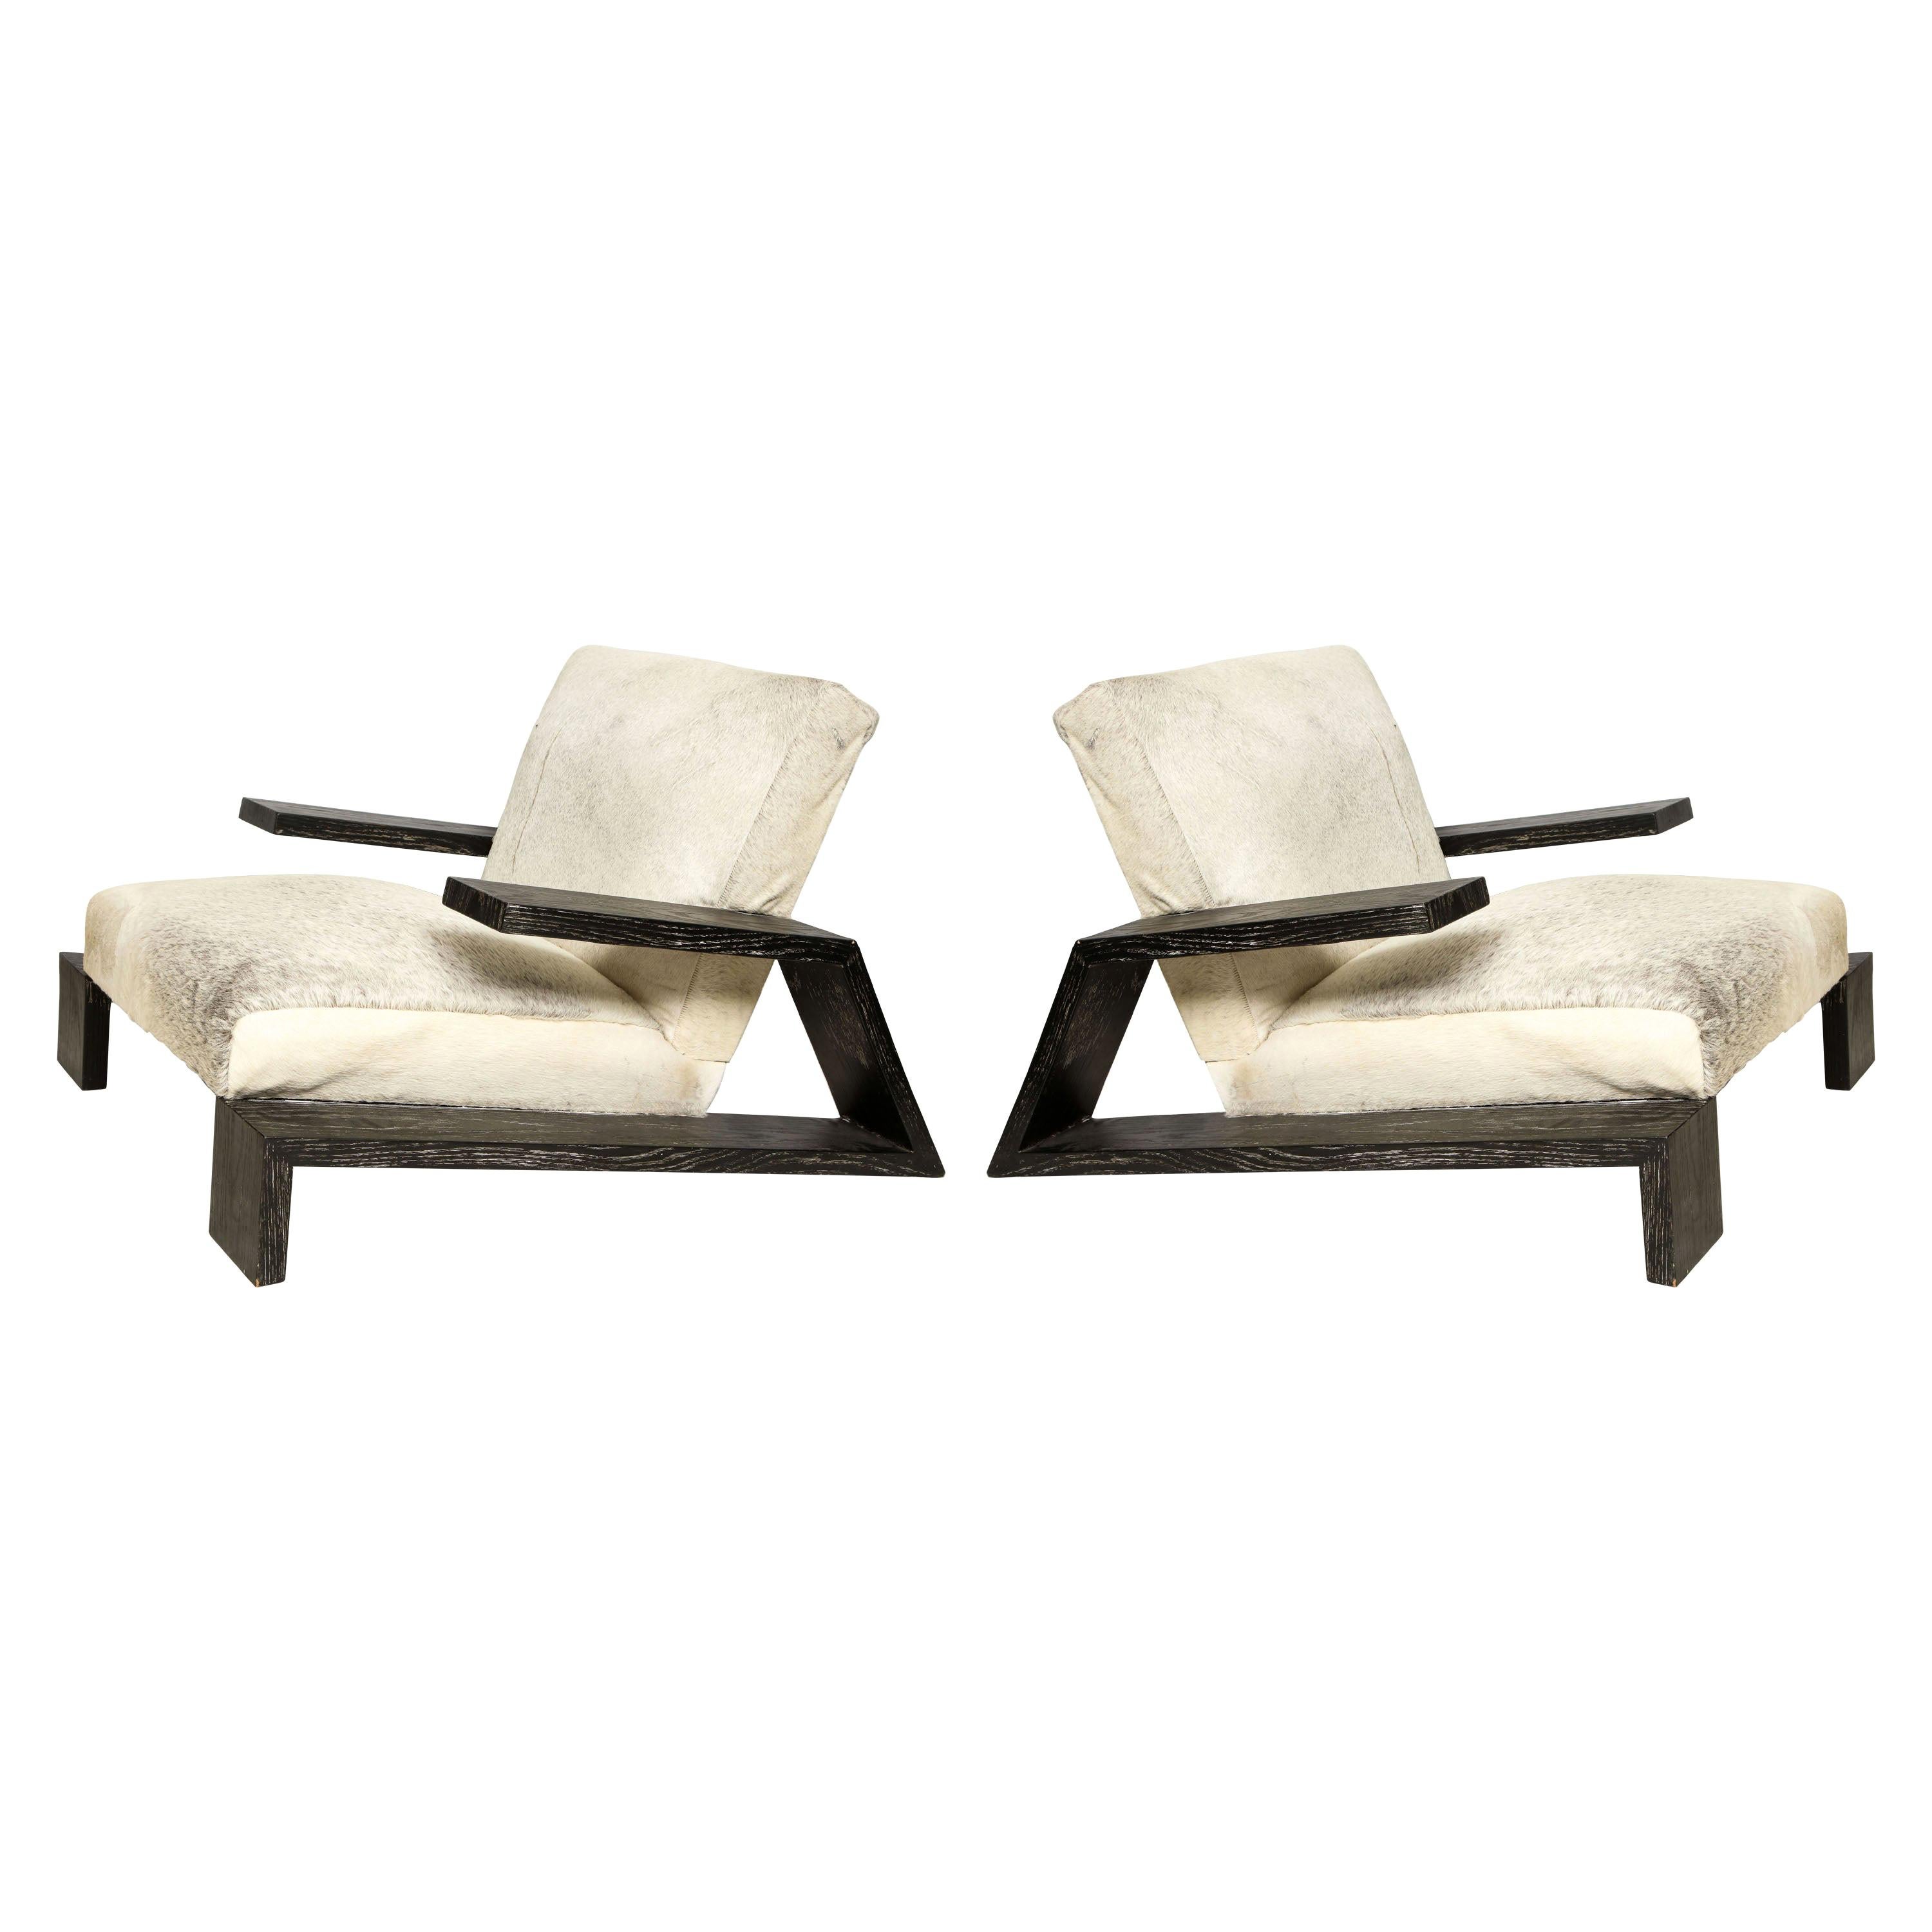 Pair of Jean-Michel Frank Style Cerused Oak Lounge Chairs Upholstered in Cowhide